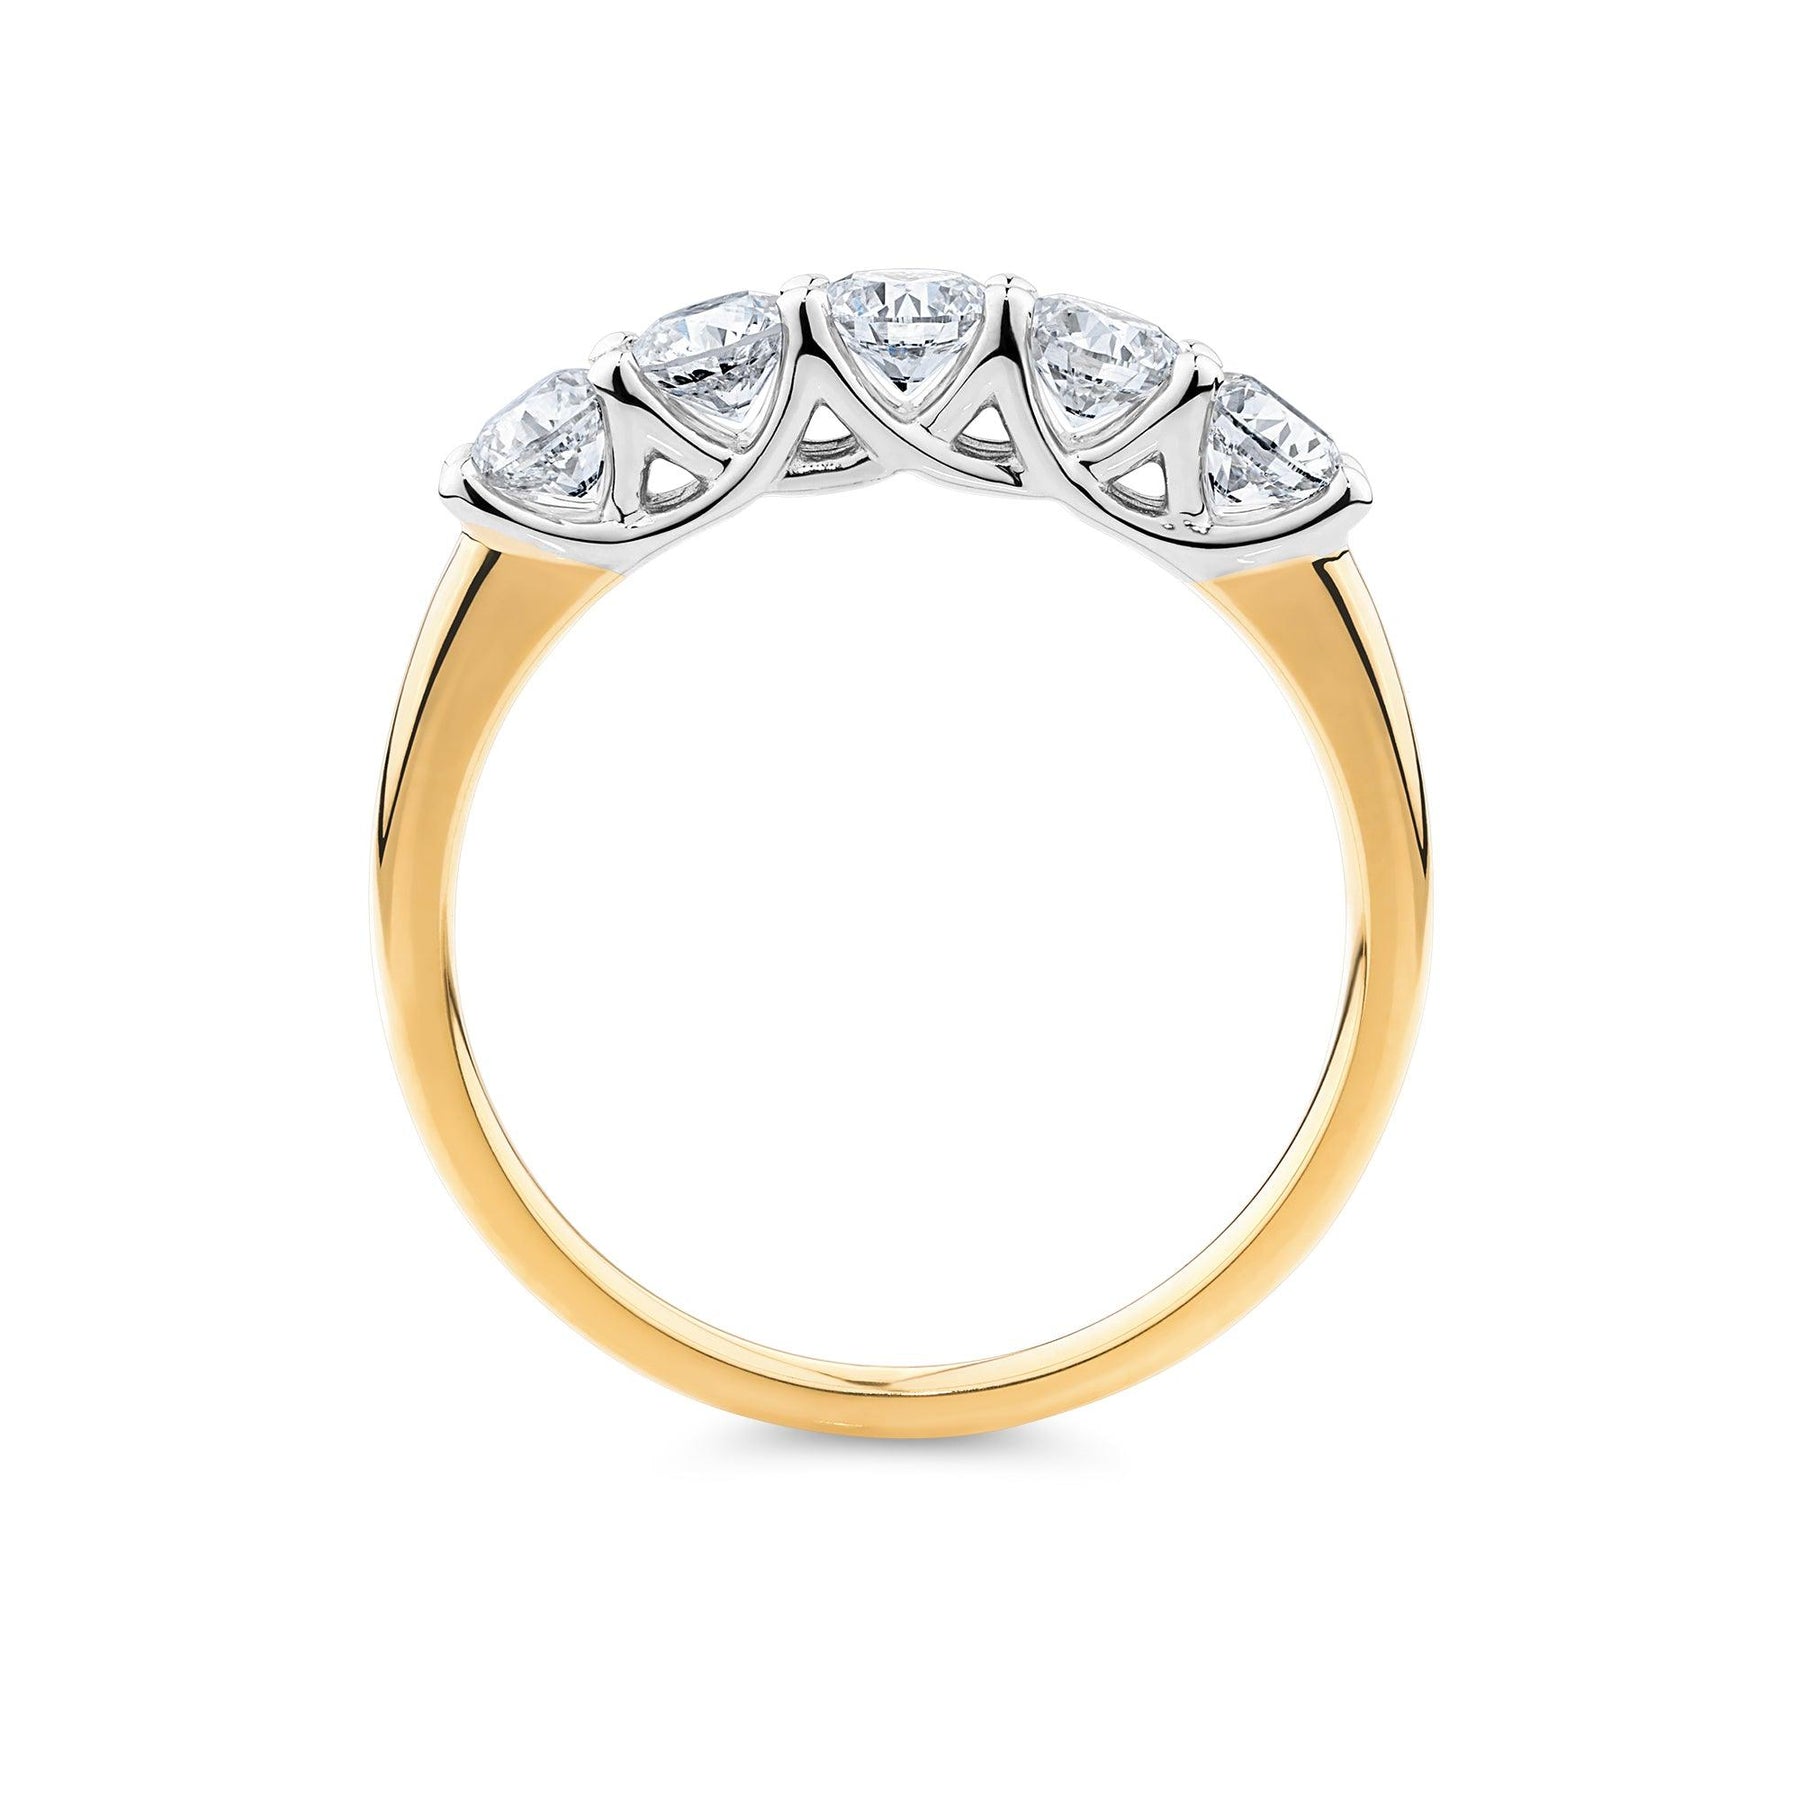 1ct TW Diamond 5 Stone Engagement Ring in 18ct Yellow and White Gold - Wallace Bishop